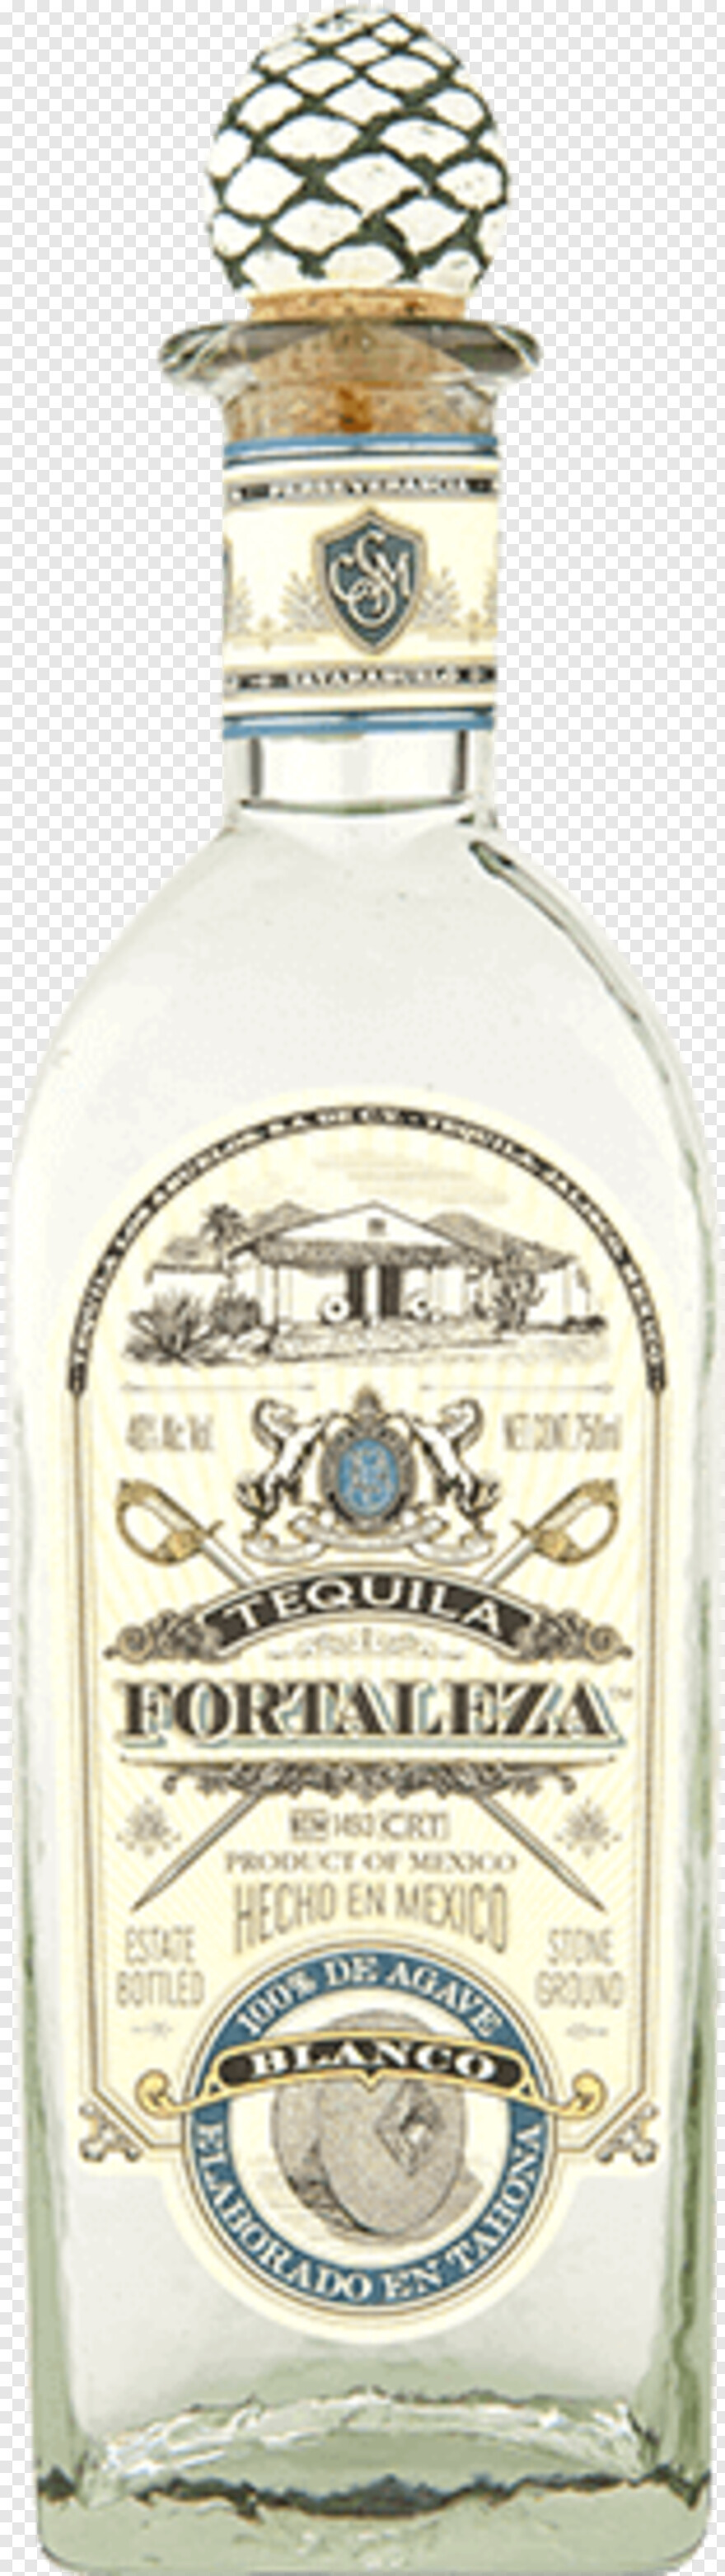 tequila # 370464